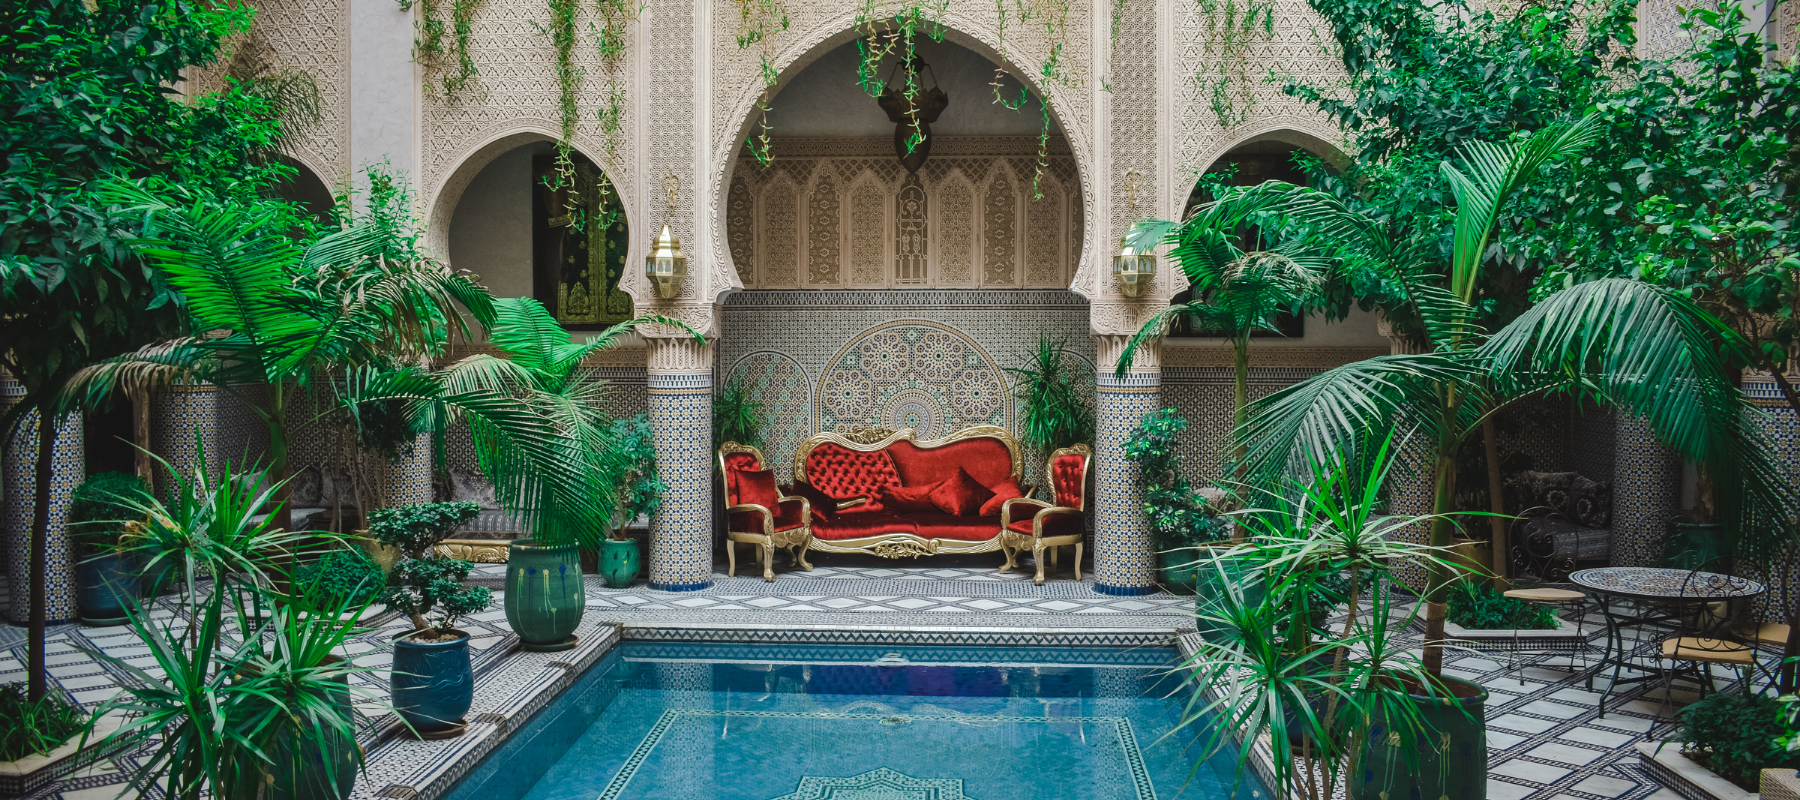 A Moroccan Riad with a pool